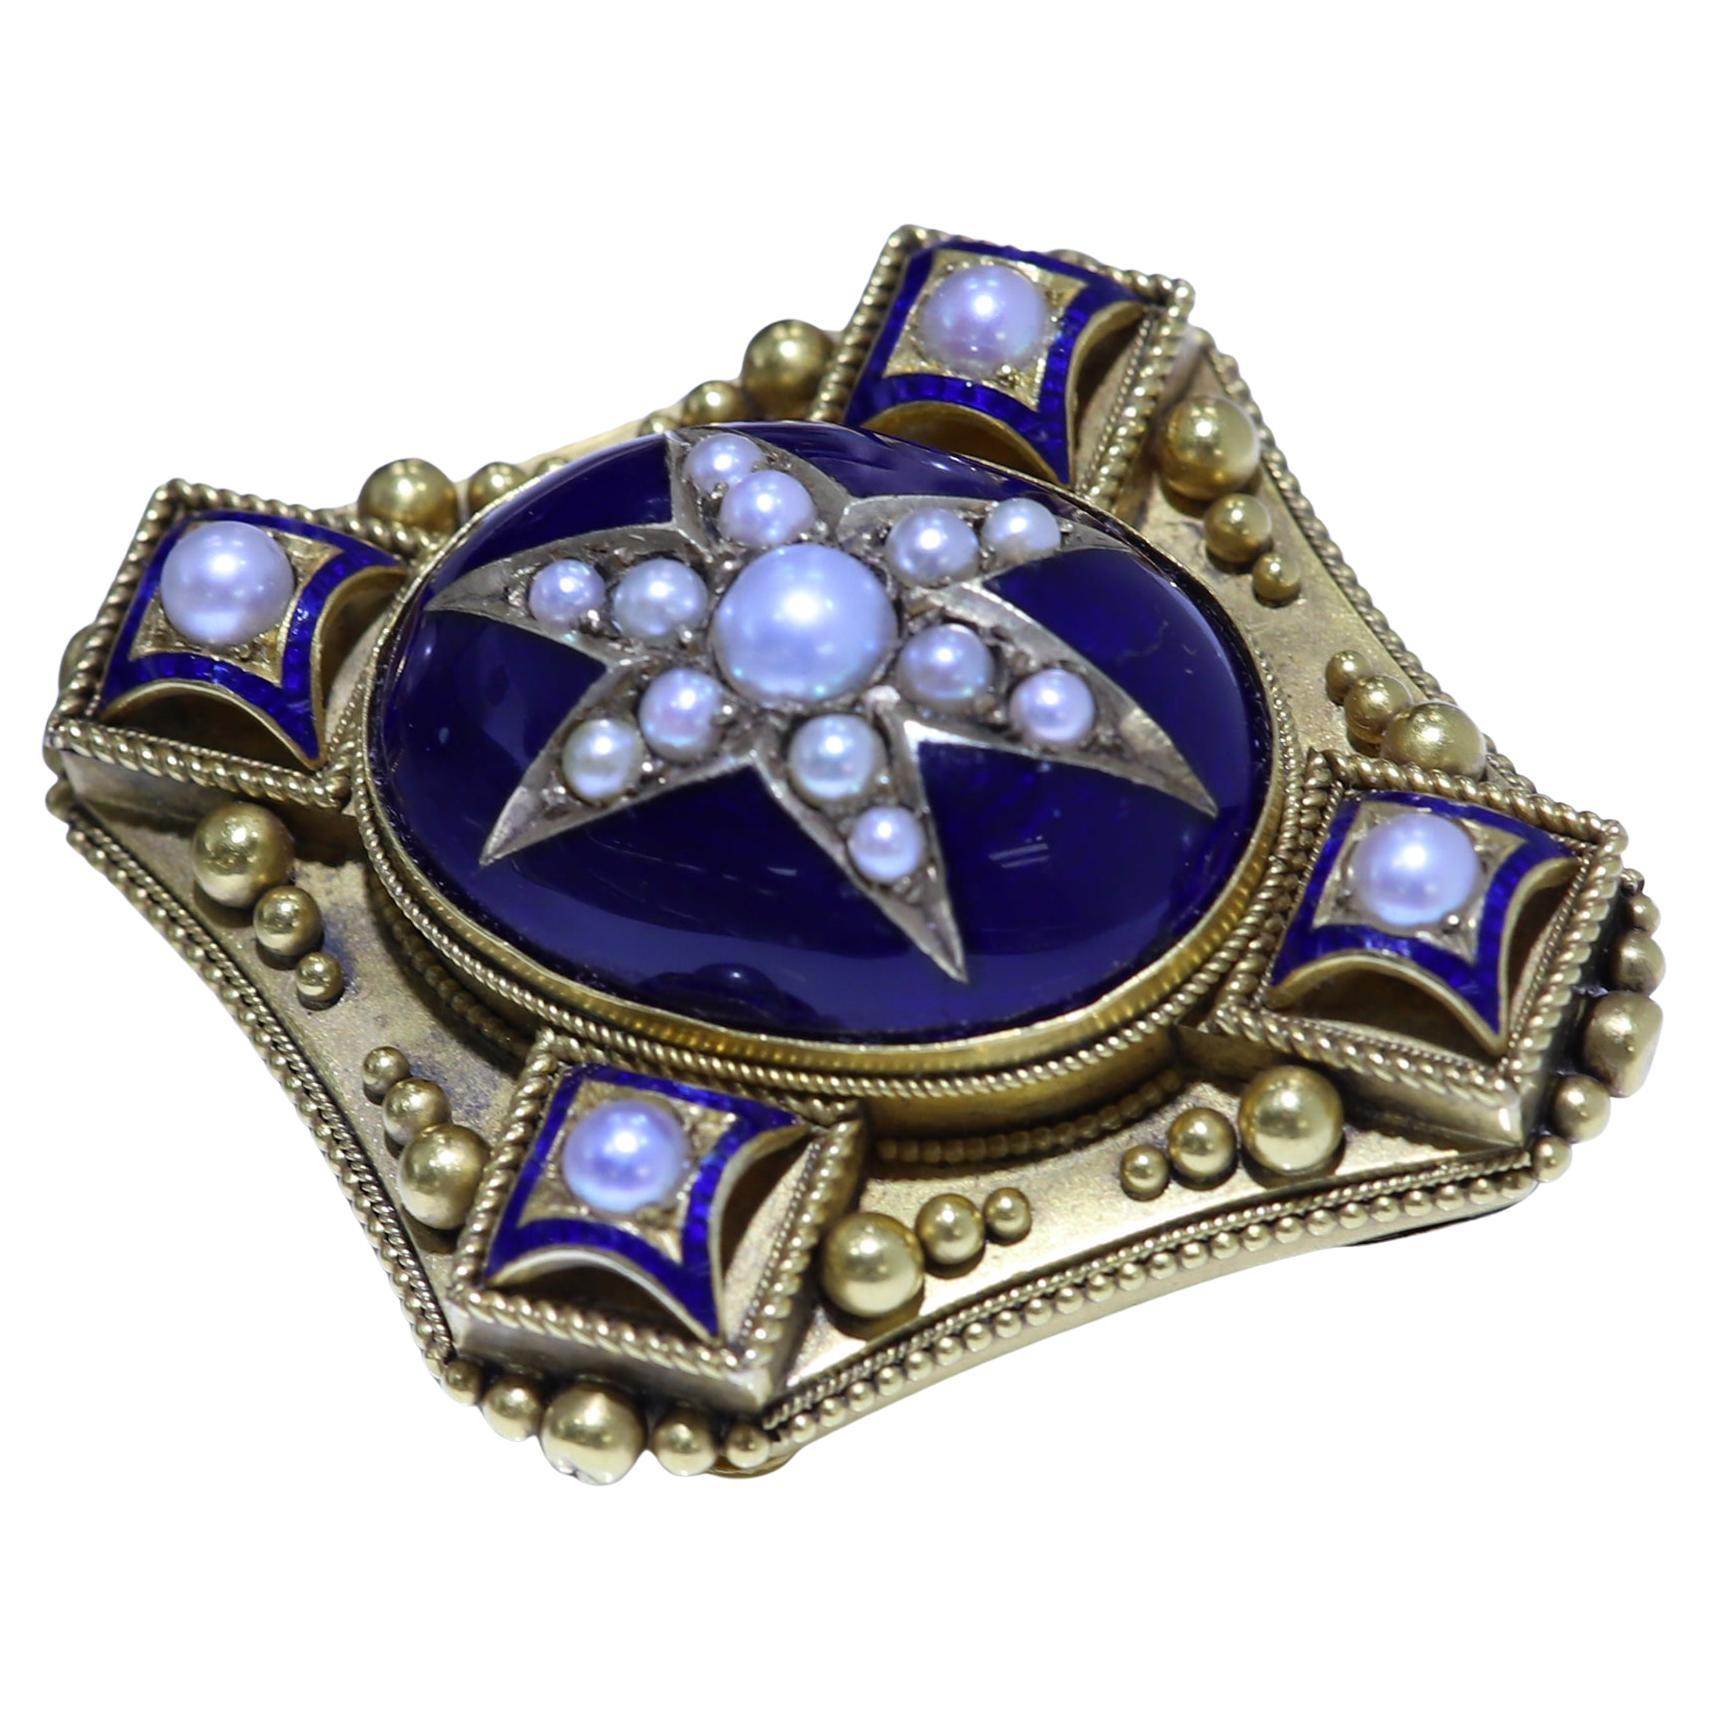 Victorian style French made
Vintage gold mourning brooch pin
18k yellow gold 28.30 grams
Cobalt Blue Enamel, Pearls and Picture/hair space.
circa late 1800 - early 1920
size:  50 x 40 mm
good condition
(#bij91240019)
